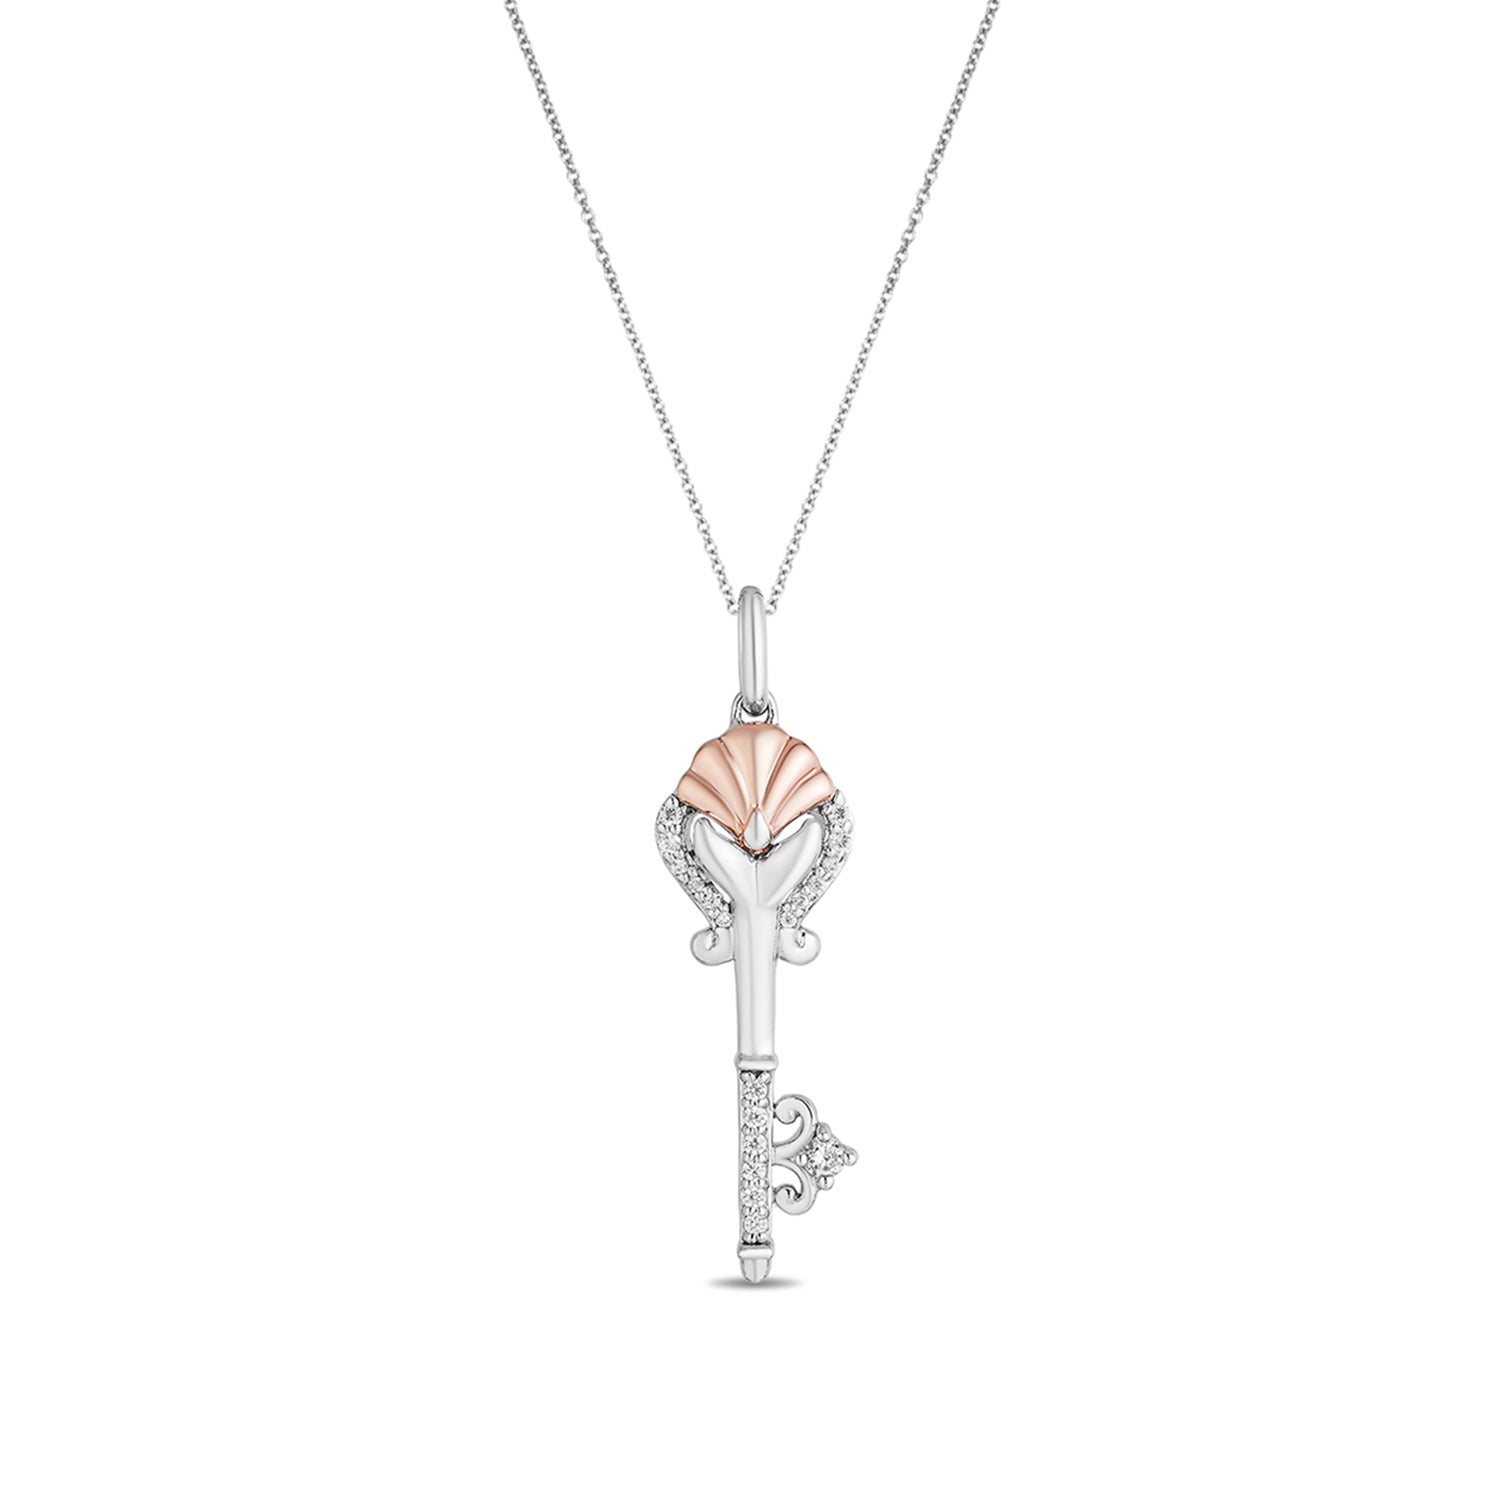 Disney Aurora Inspired Diamond Pendant Necklace Rose Gold Over Sterling Silver 1/5 Cttw | Enchanted Disney Fine Jewelry